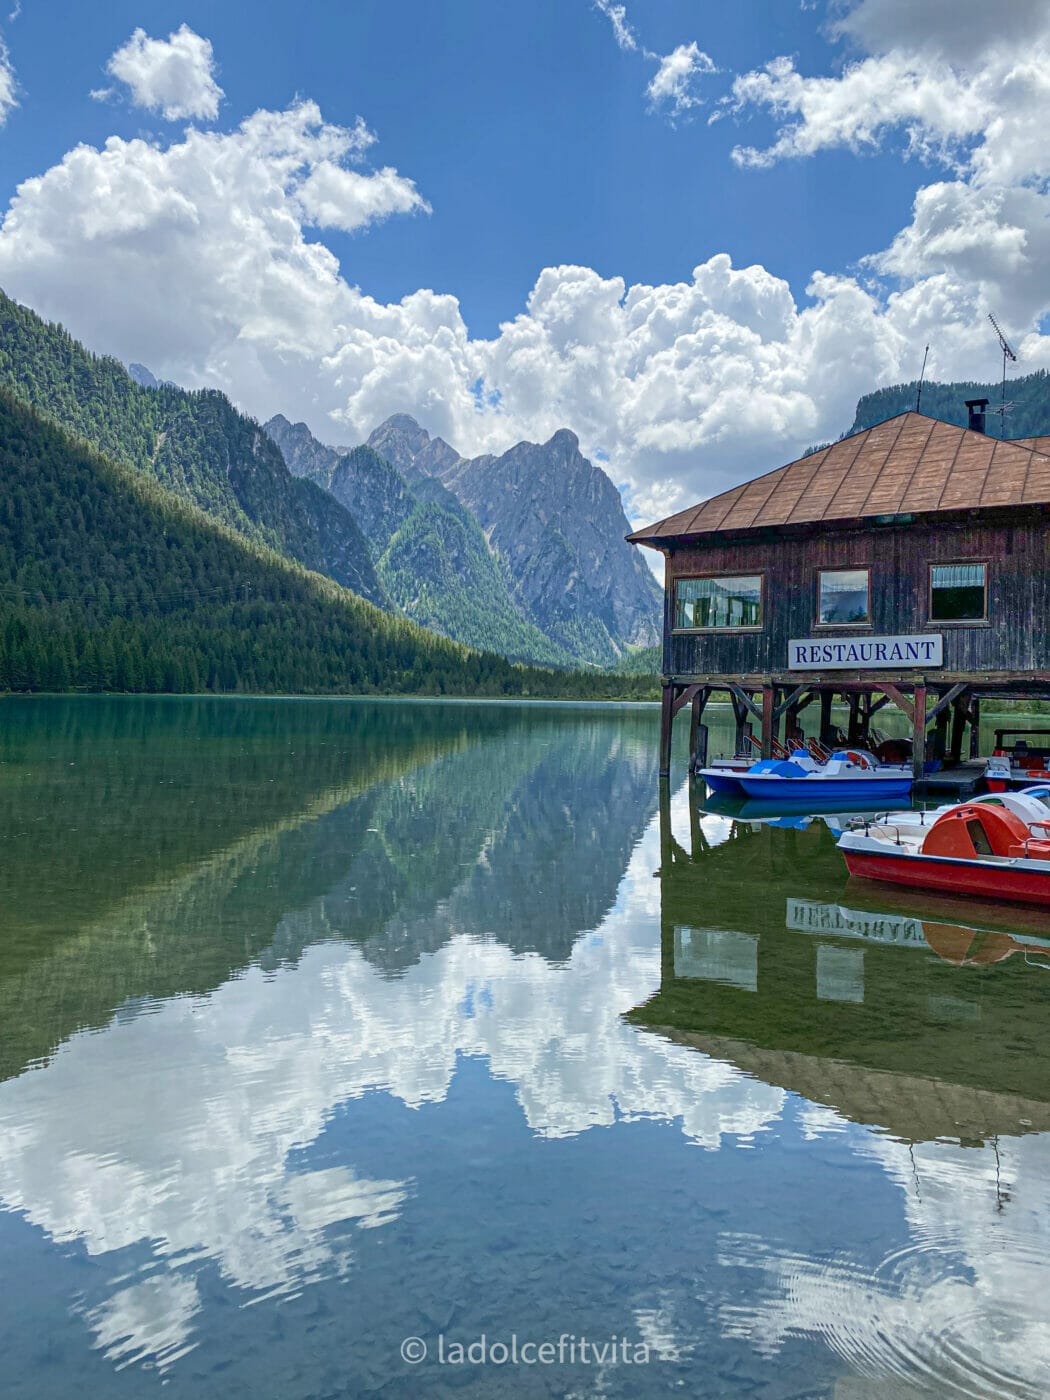 Lakeside restaurant and boat rental at beautiful turquoise Lago di Dobbiaco in Italy